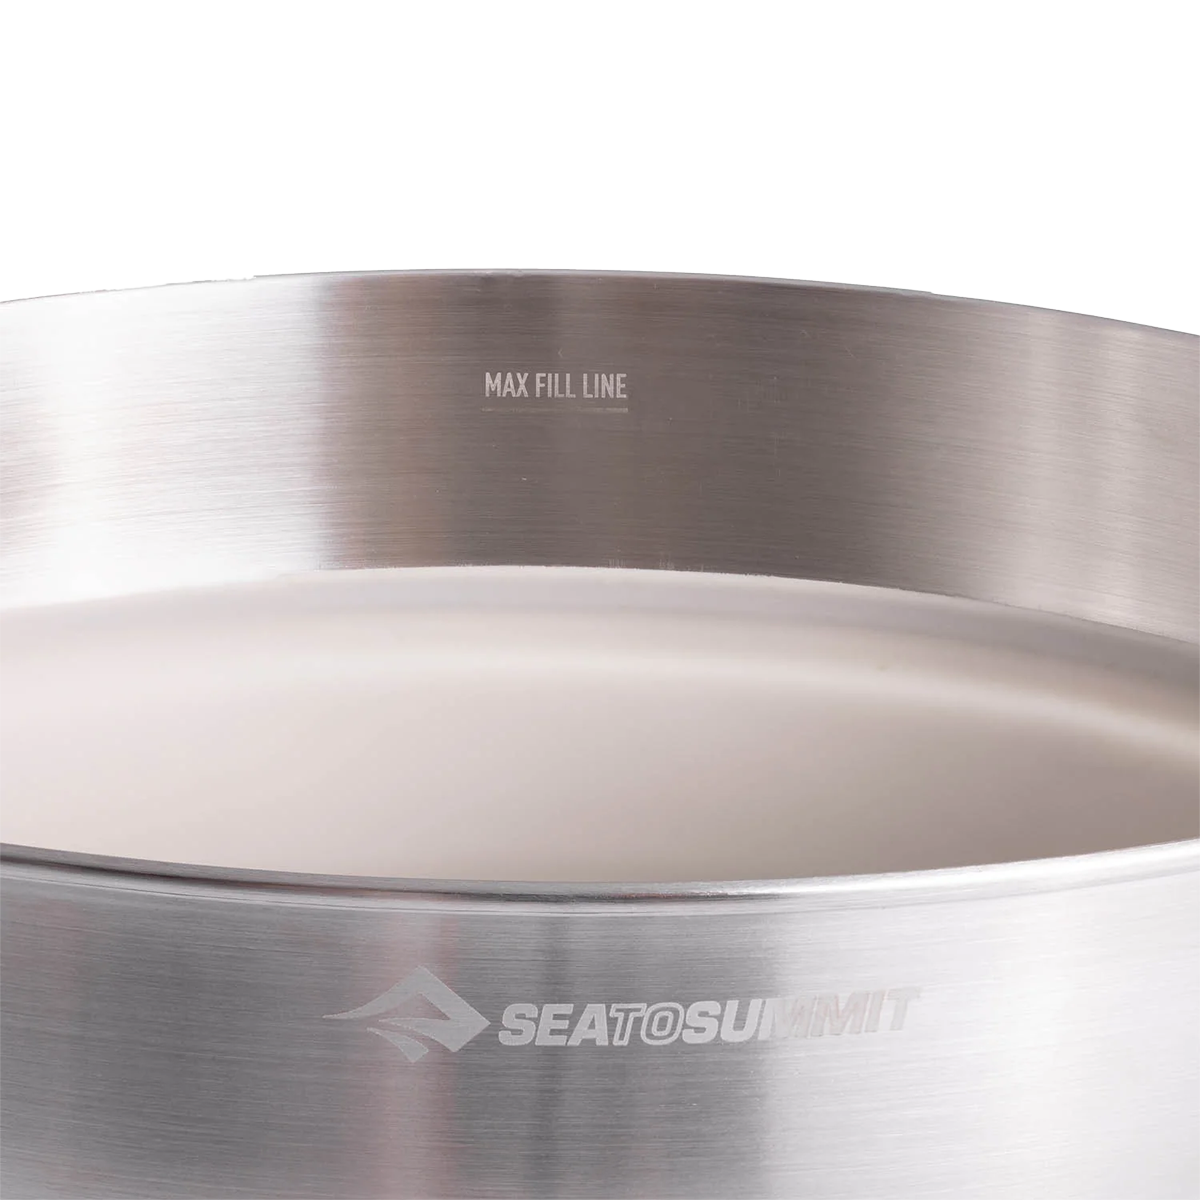 Detour Stainless Collapsible Pot 5 L alternate view